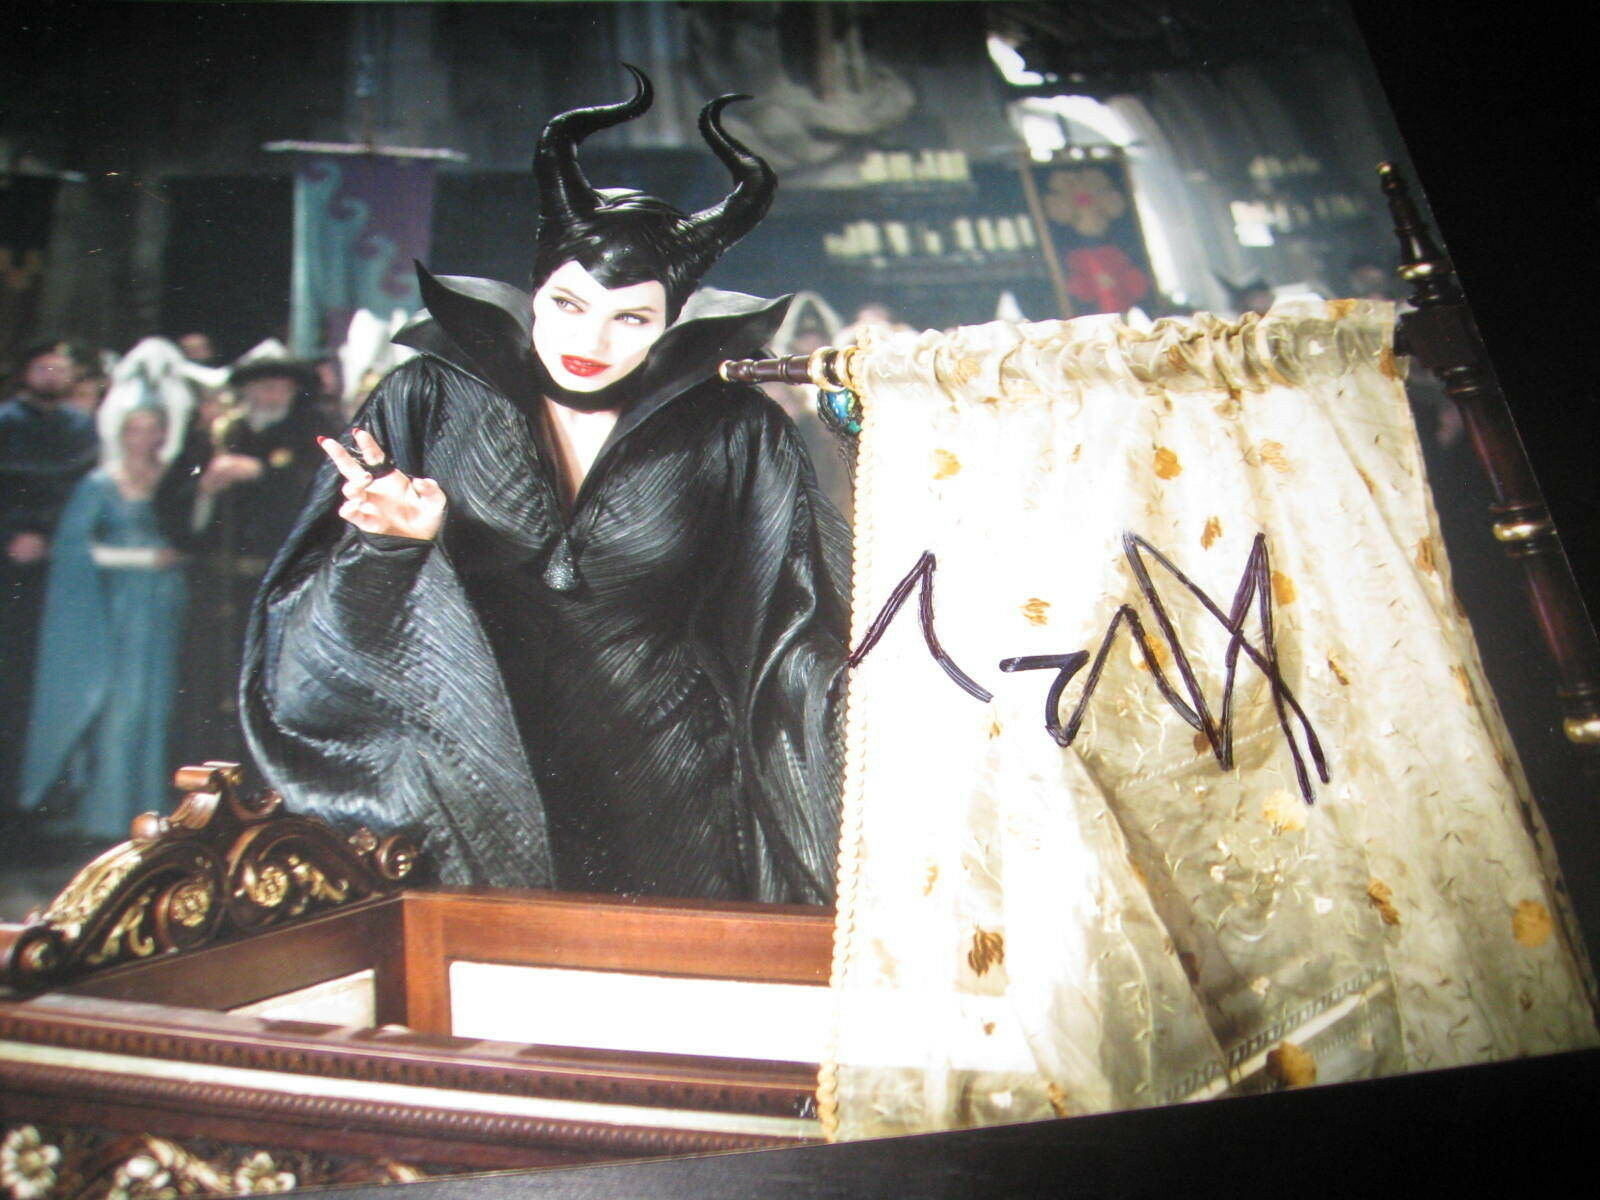 ANGELINA JOLIE SIGNED AUTOGRAPH 8x10 PHOTO MALEFICENT PROMO IN PERSON